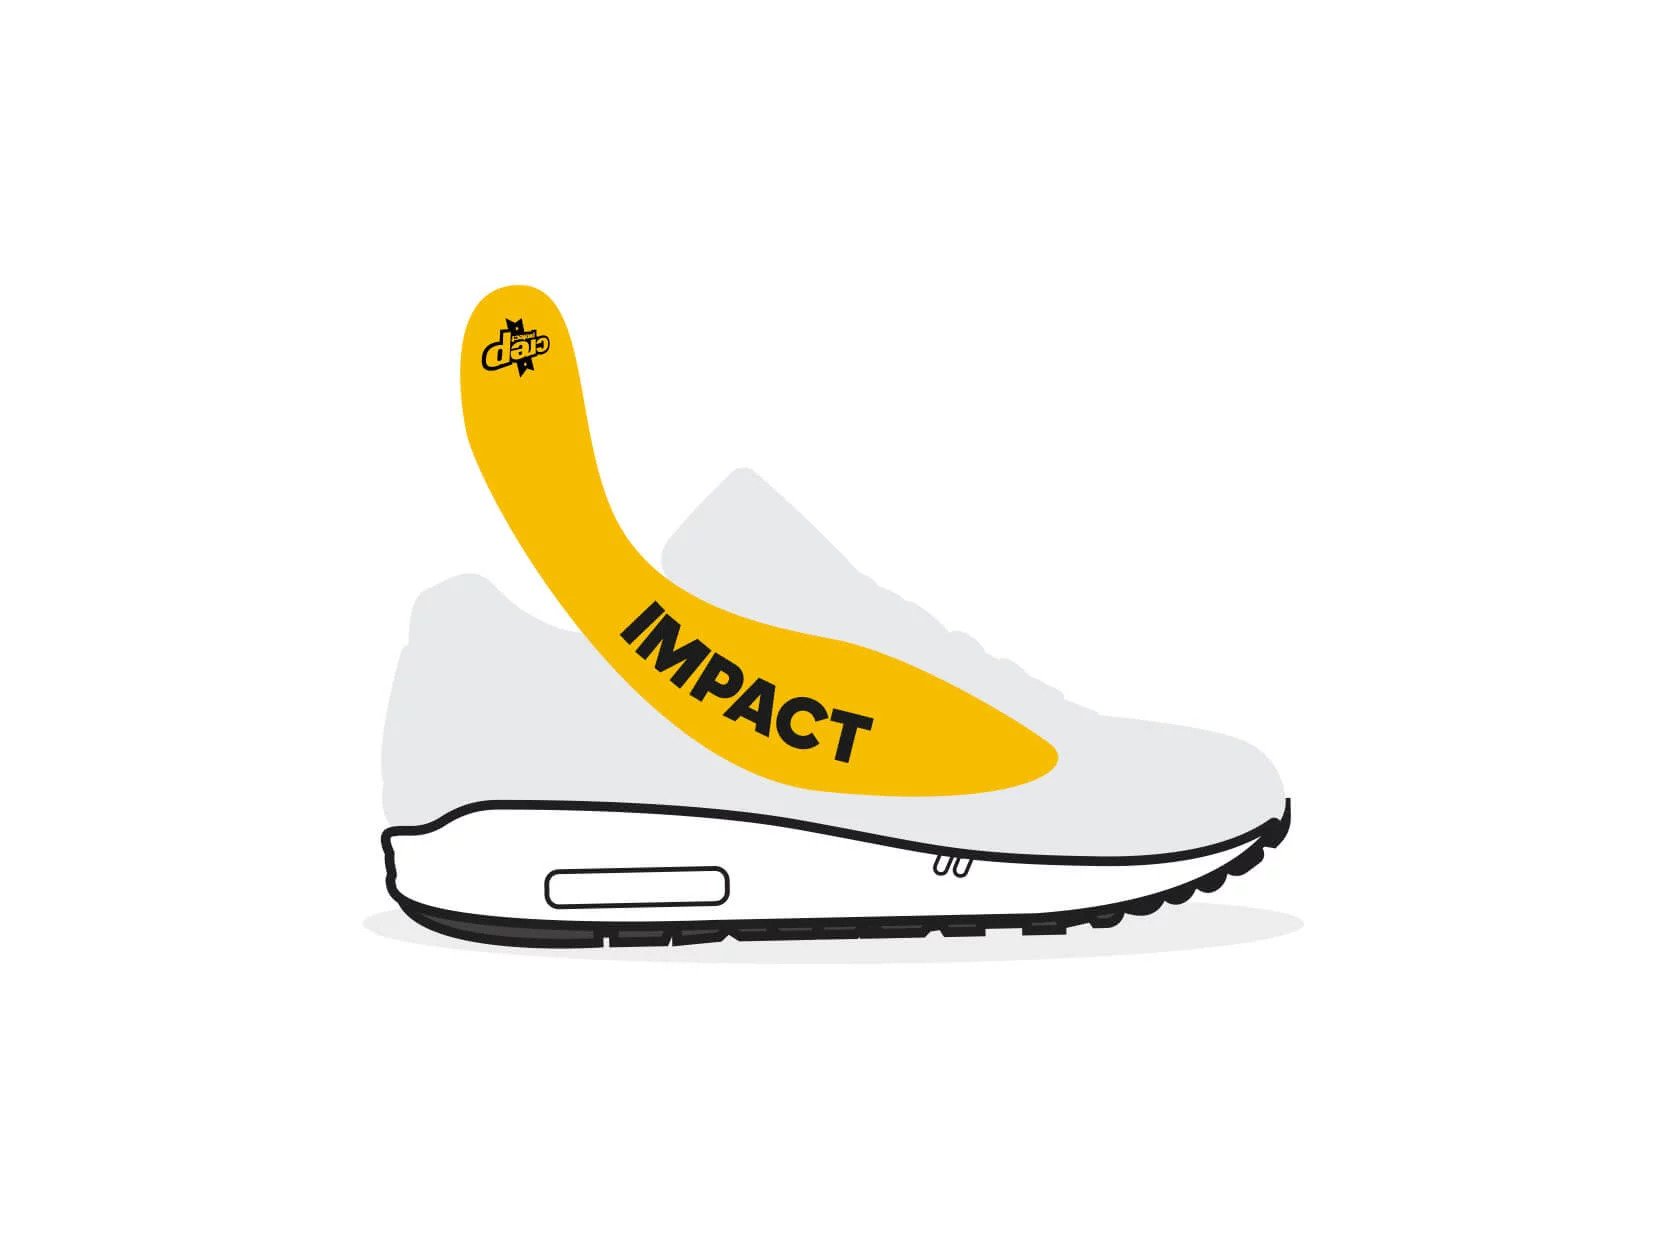 crepprotect insoles